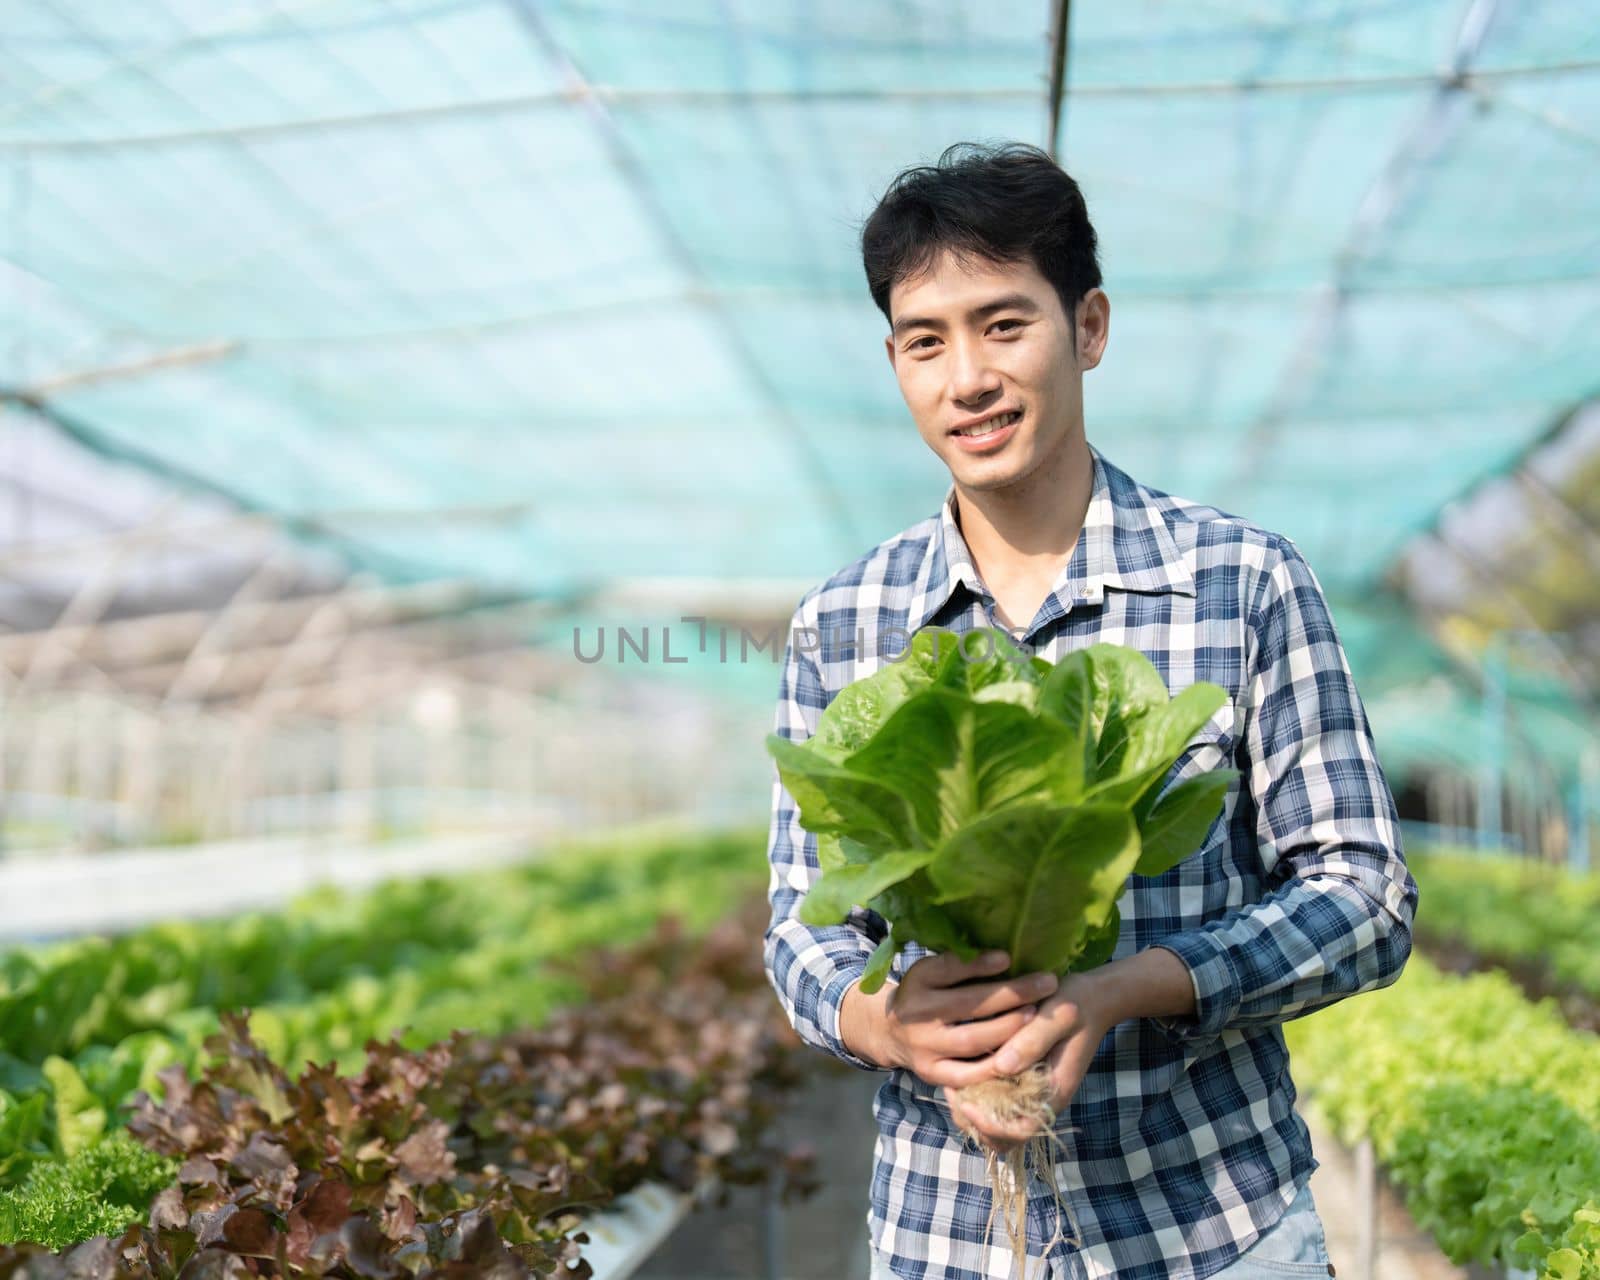 Smiling male gardener holds box of fresh green red lettuce vegetables in greenhouse garden. Young asian farmer harvest natural organic salad vegetables on hydroponic farm cultivation.